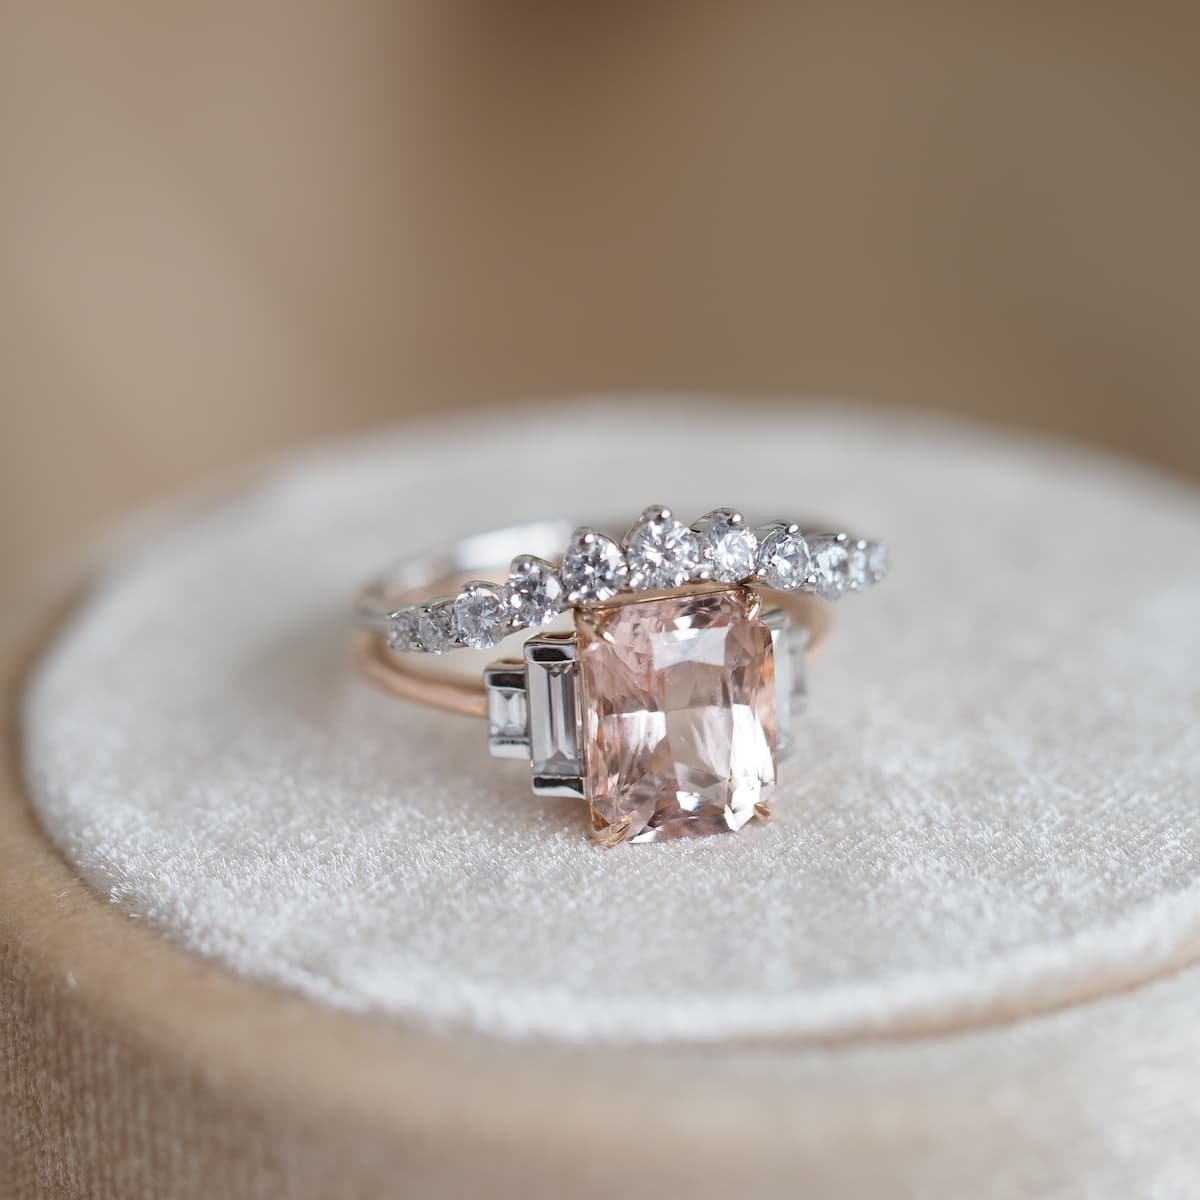 Buy 3CT Pink Morganite Engagement Ring Emerald Cut 14k White Gold Diamond  Band Anniversary Gift for Her Online in India - Etsy